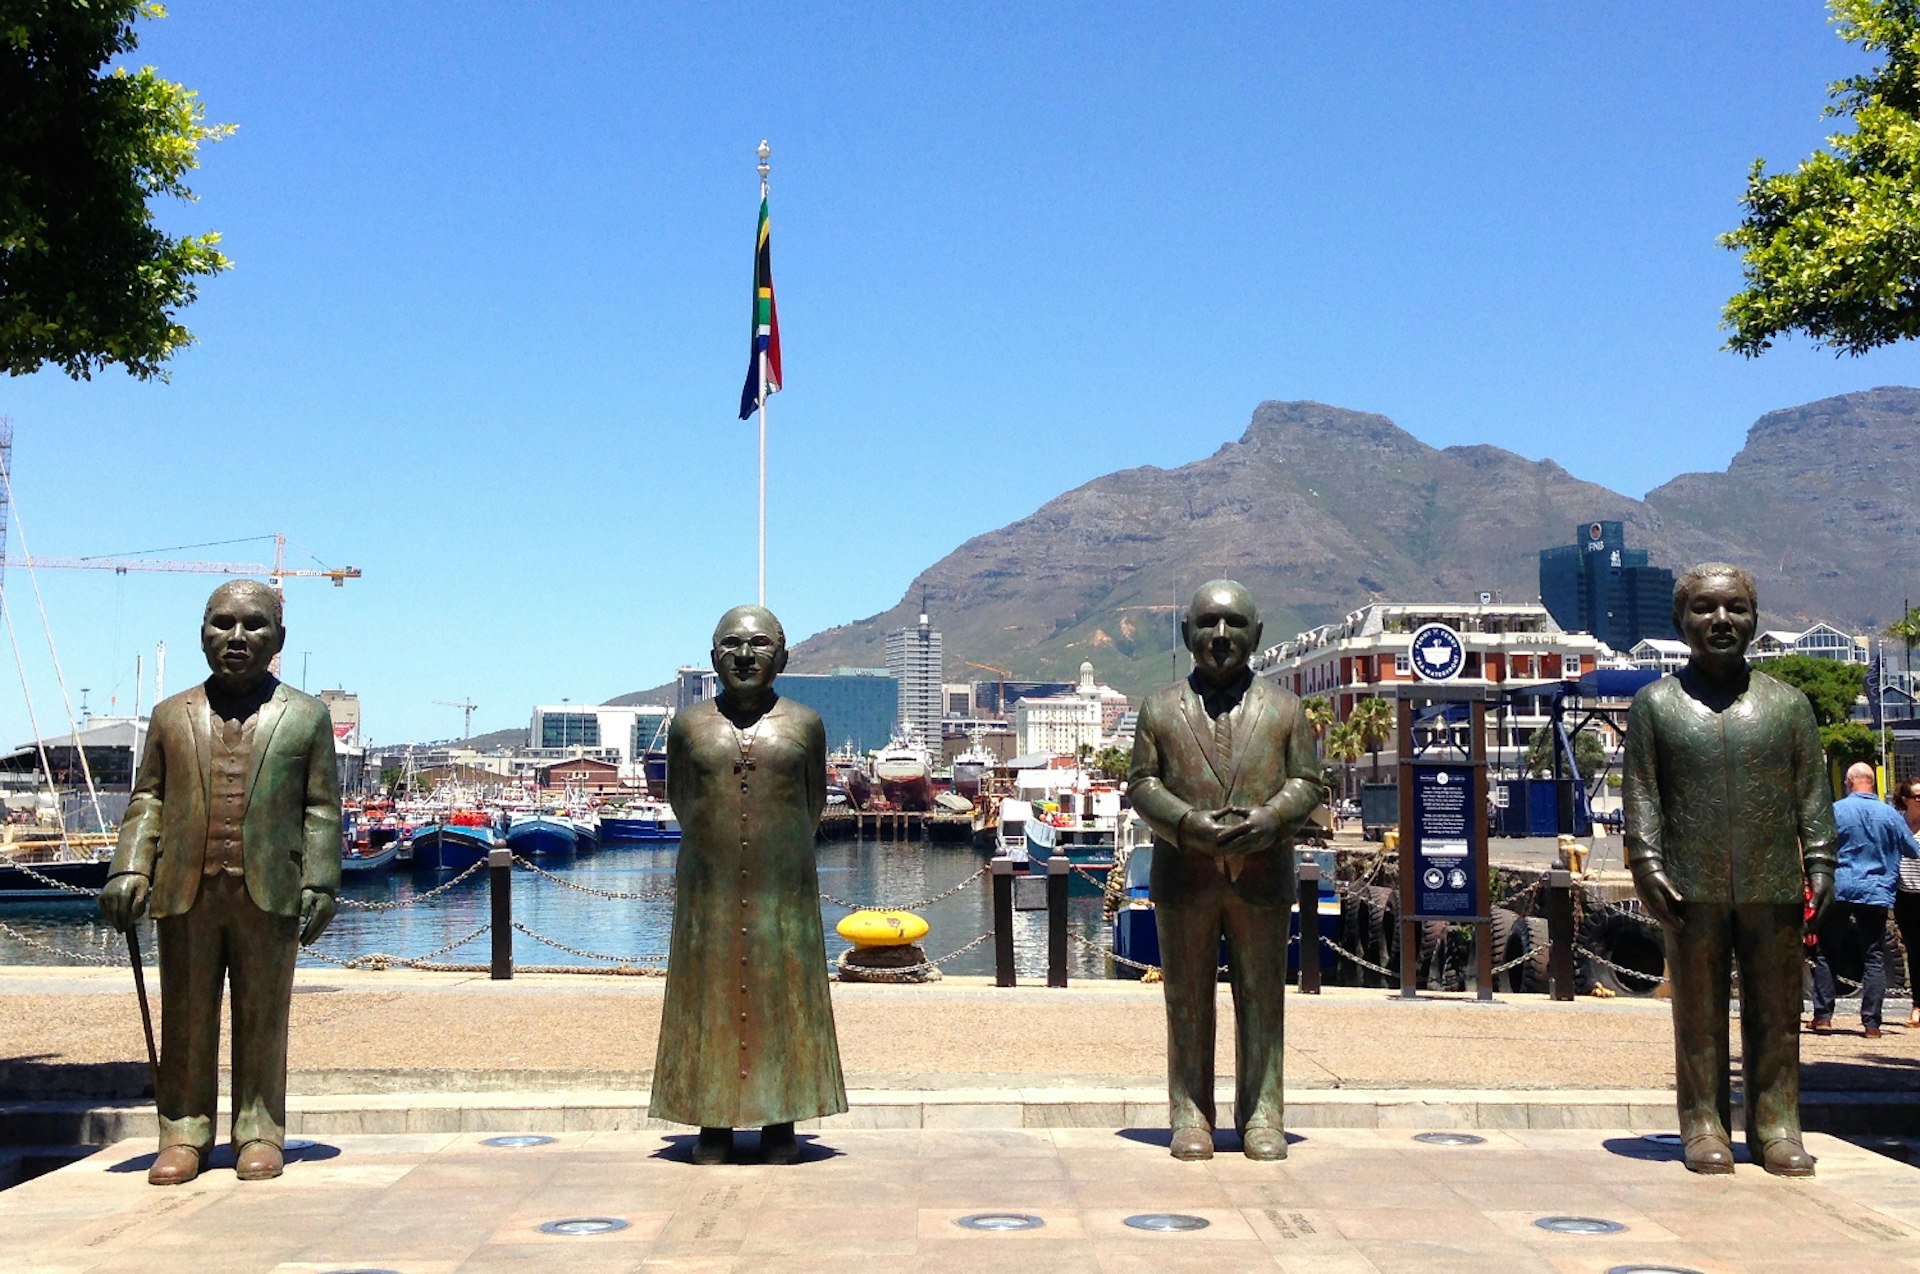 With Table Mountain as a backdrop, four bronze statues stand side-by-side in front of the V&A Waterfront and a flagpole with the South African flag.